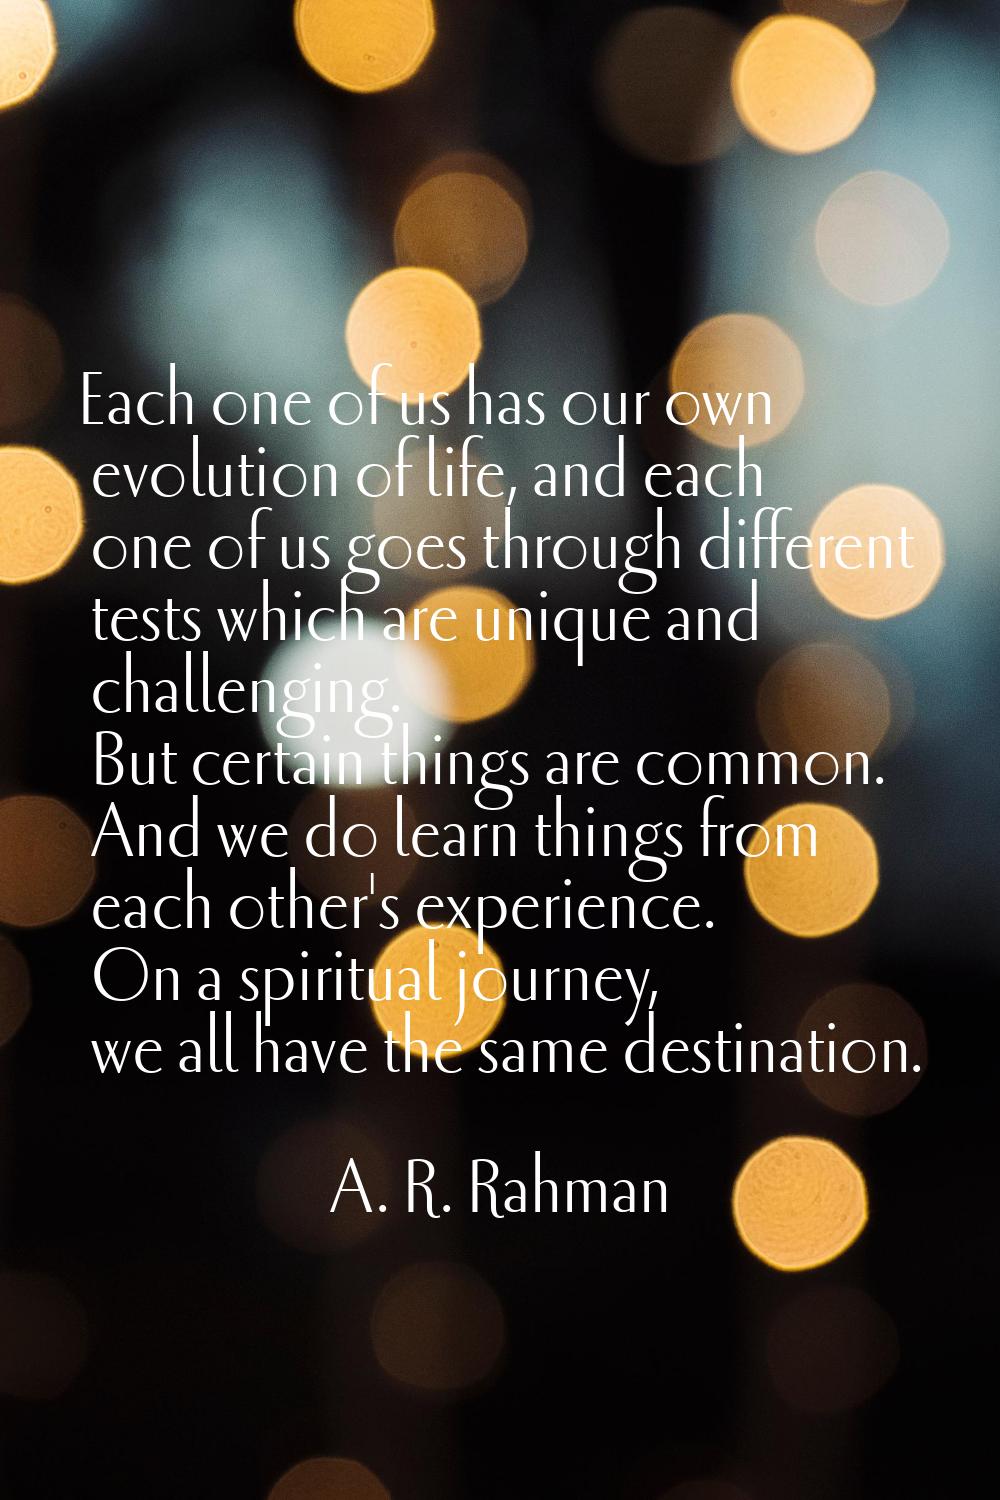 Each one of us has our own evolution of life, and each one of us goes through different tests which